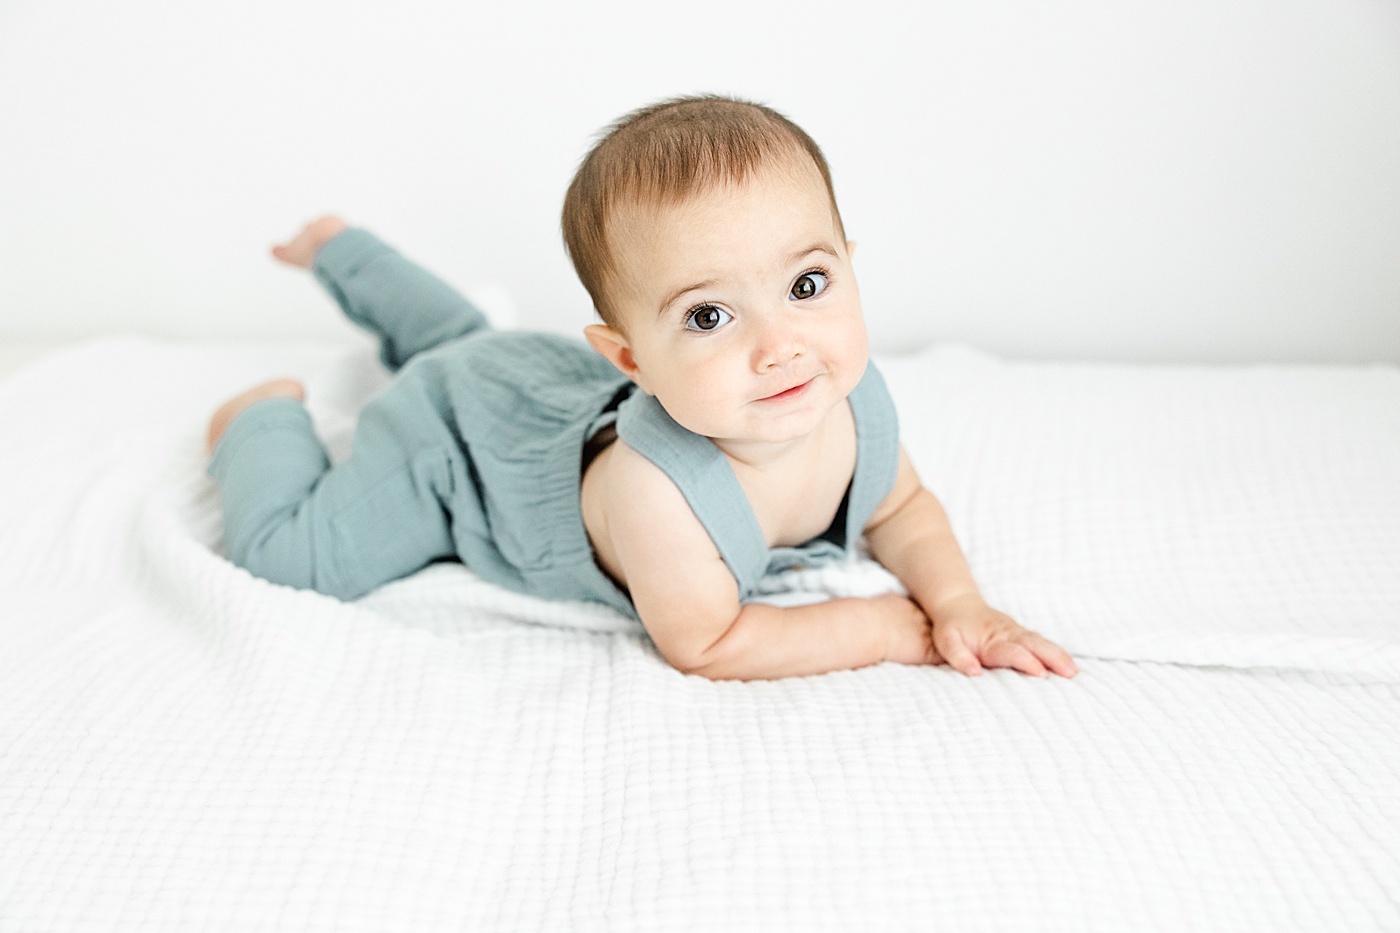 7 month old milestone session | Kristin Wood Photography